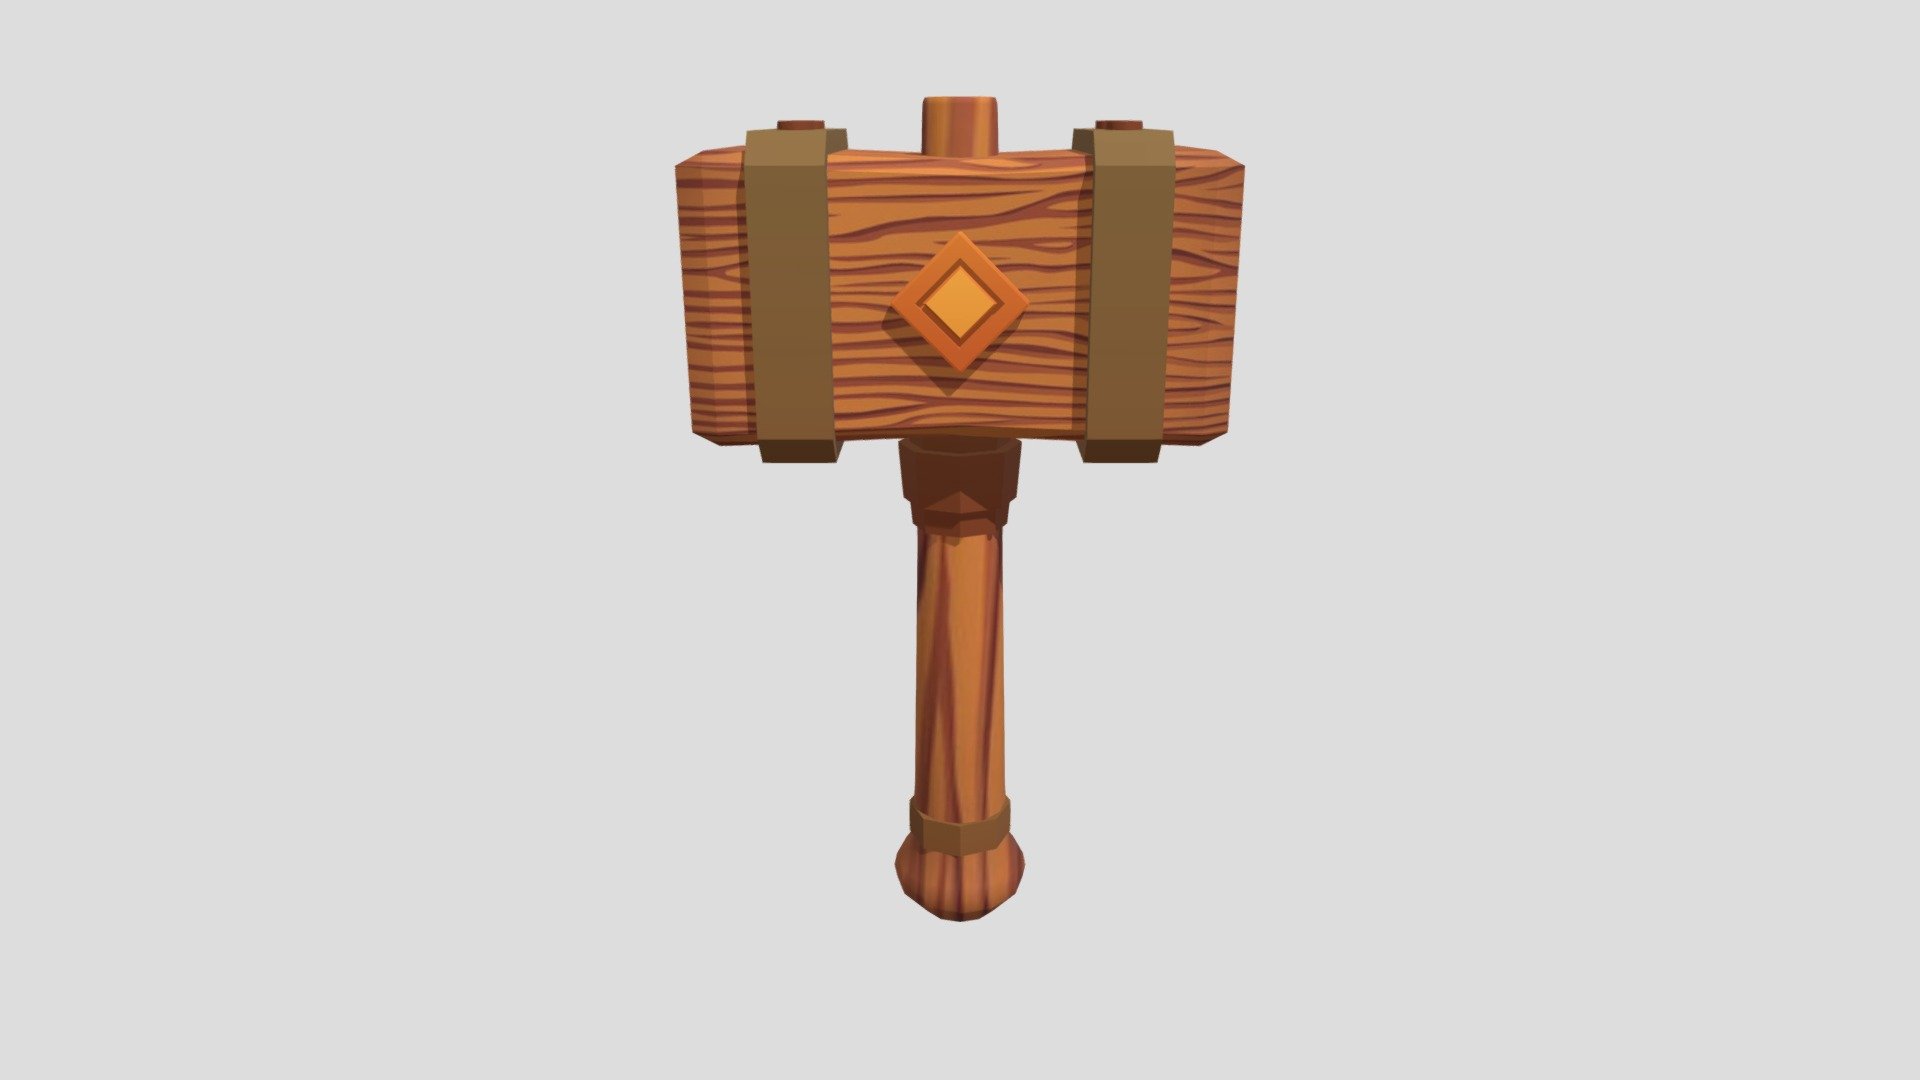 Wood hammer Game asset for Roblox studio 3D model low poly Design by winjaydesign

Discord : https://discord.gg/xGdbfKKR
IG : winjaye29 / IG : winjaydesign / FB : WinjayDesign - Wood hammer Game asset low Poly - 3D model by Winjaydesign 3d model